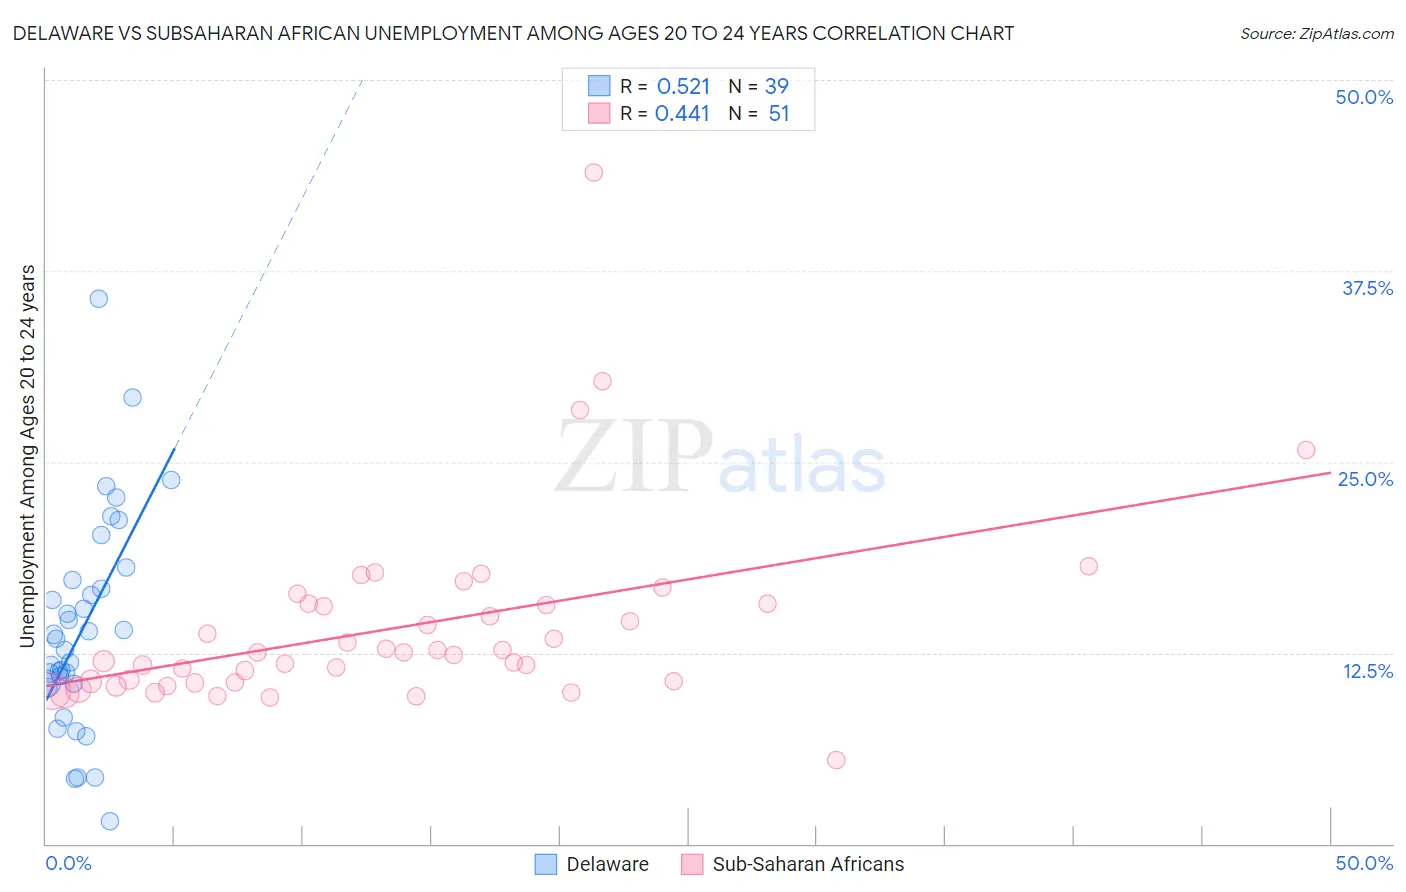 Delaware vs Subsaharan African Unemployment Among Ages 20 to 24 years